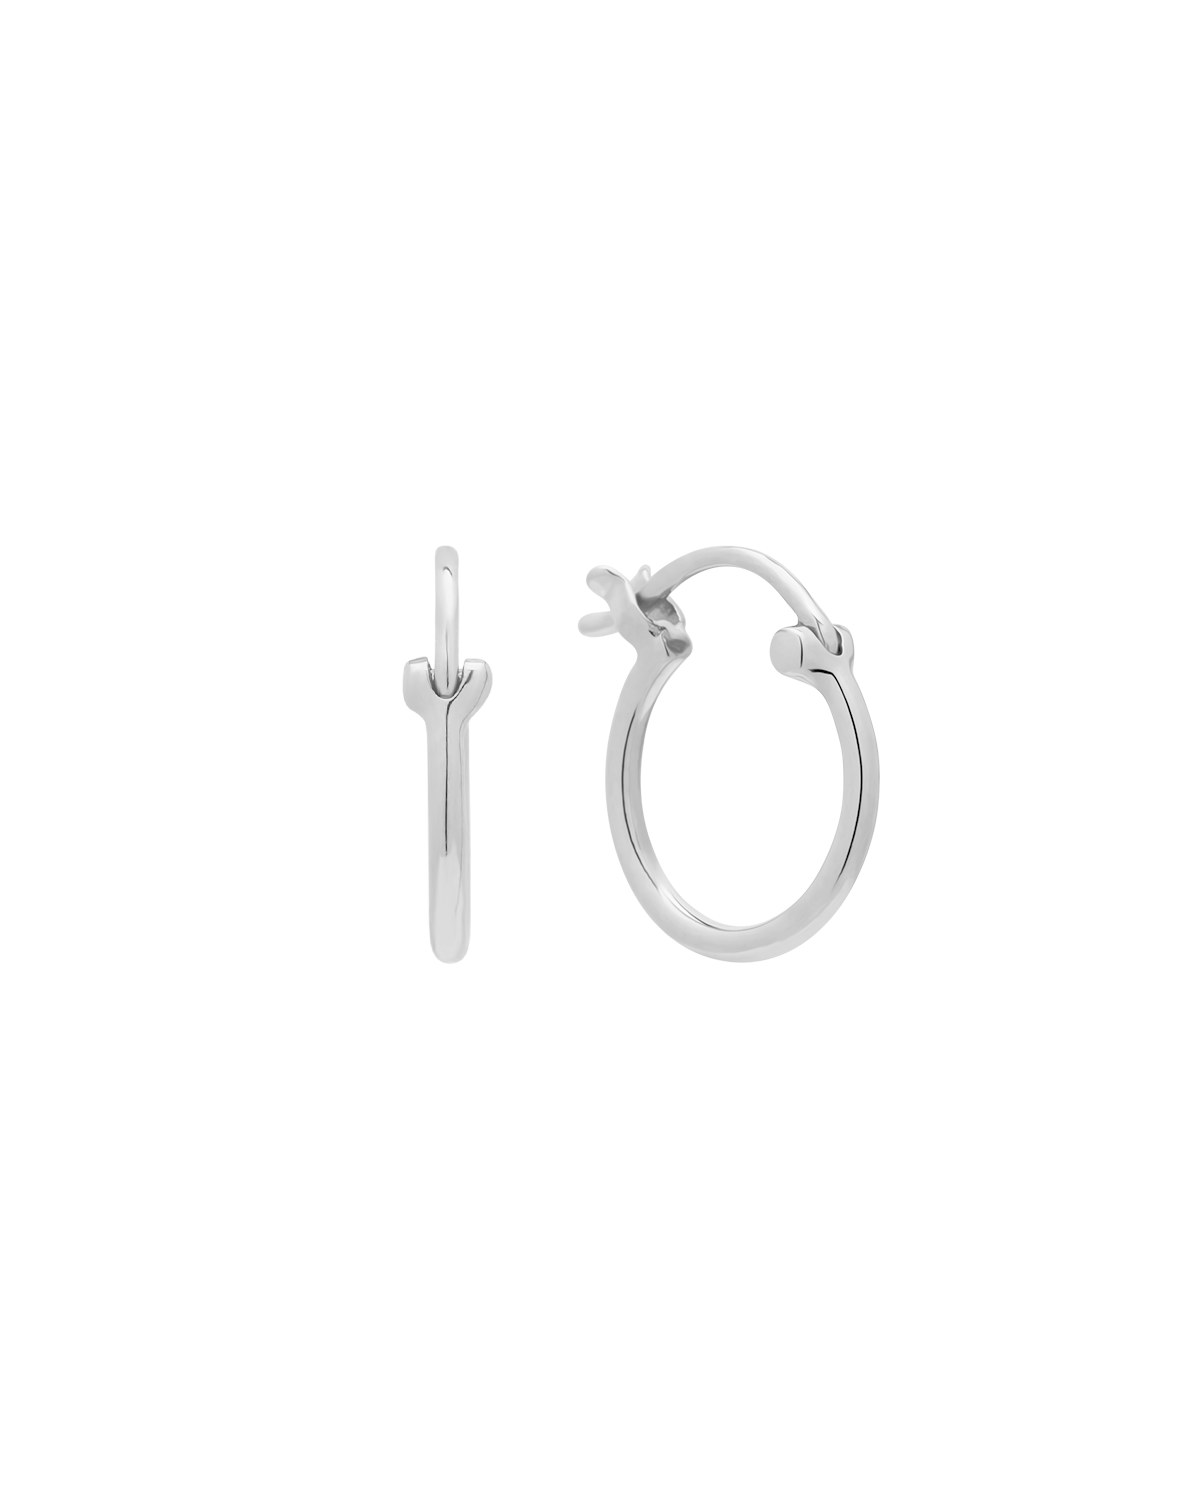 Solid White Gold Slim Latch Hoops - 12mm